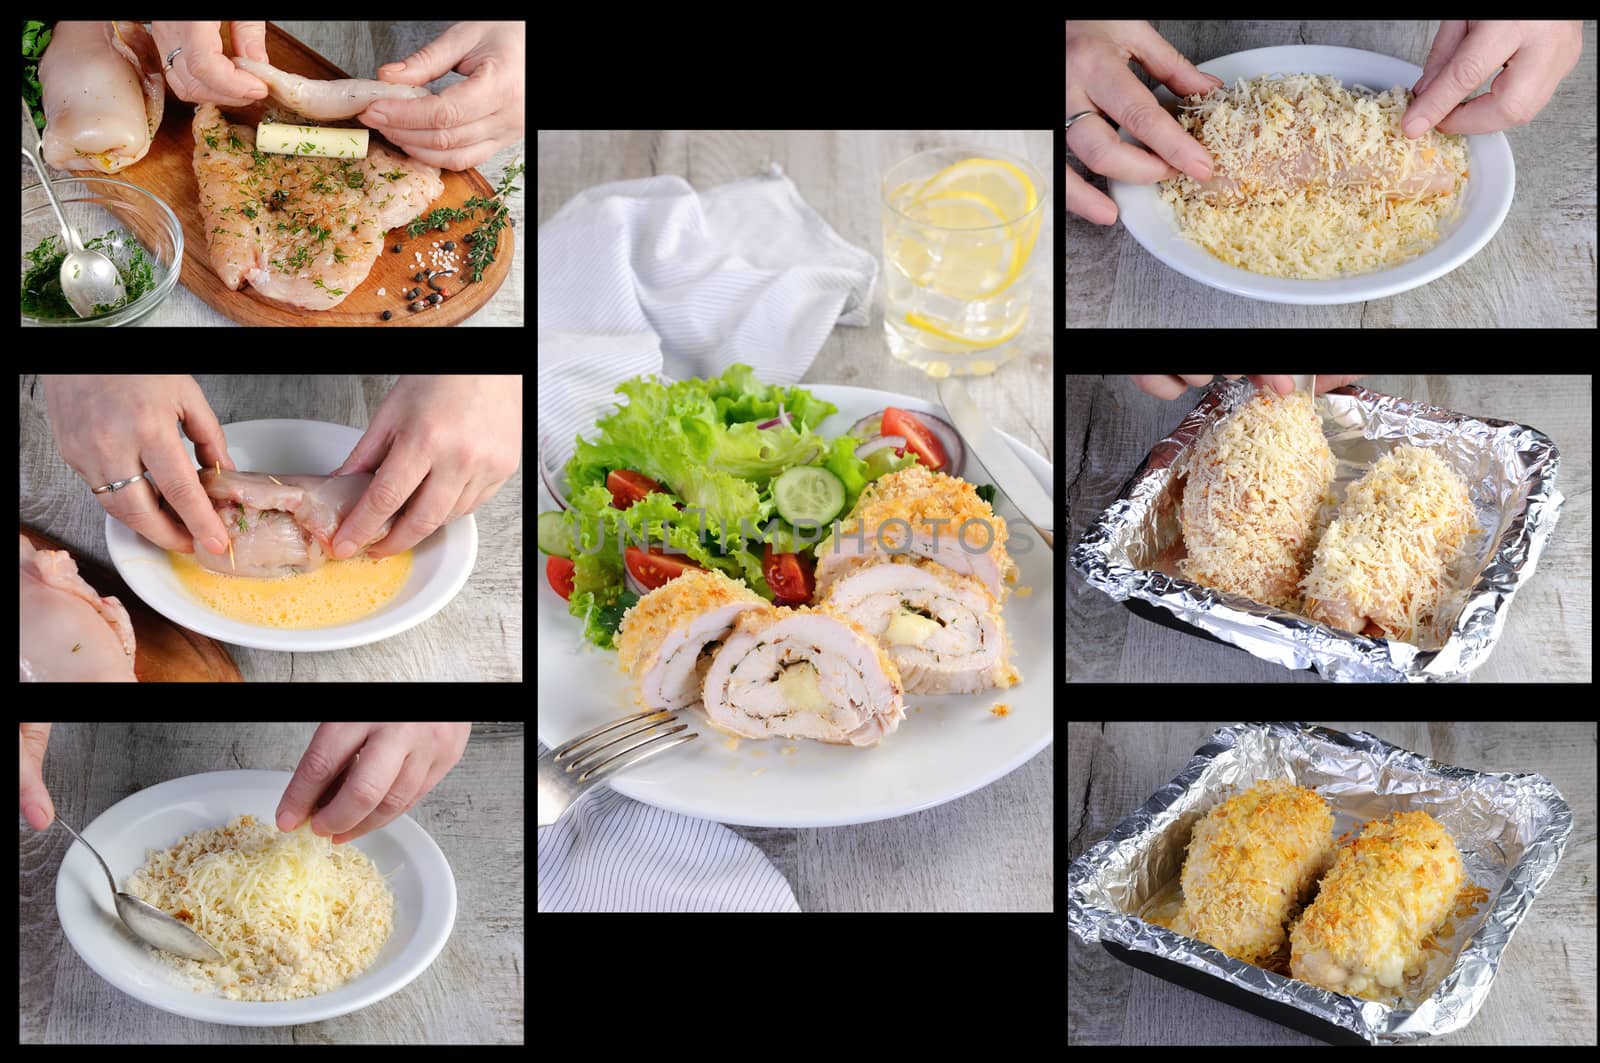 Step-by-step recipe for chicken roll with greens and mozzarella in breading.